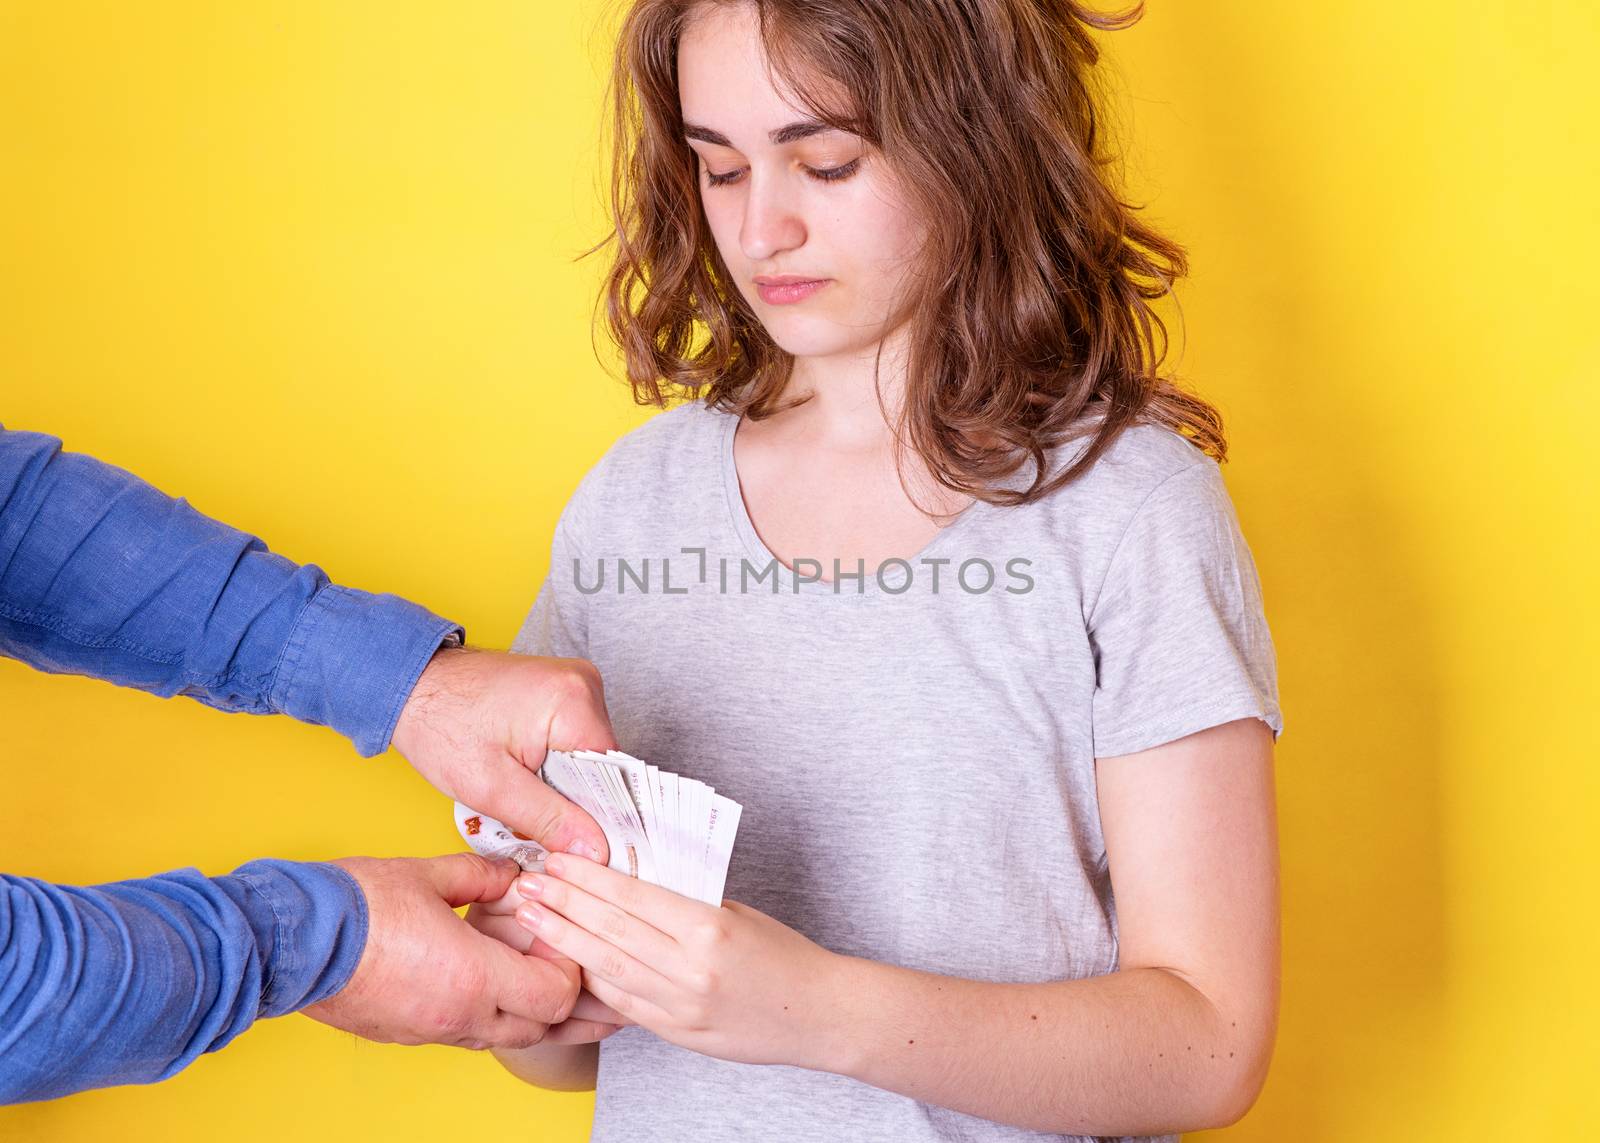 Unhappy young woman holding money and man taking away money. The payment holiday came to end.